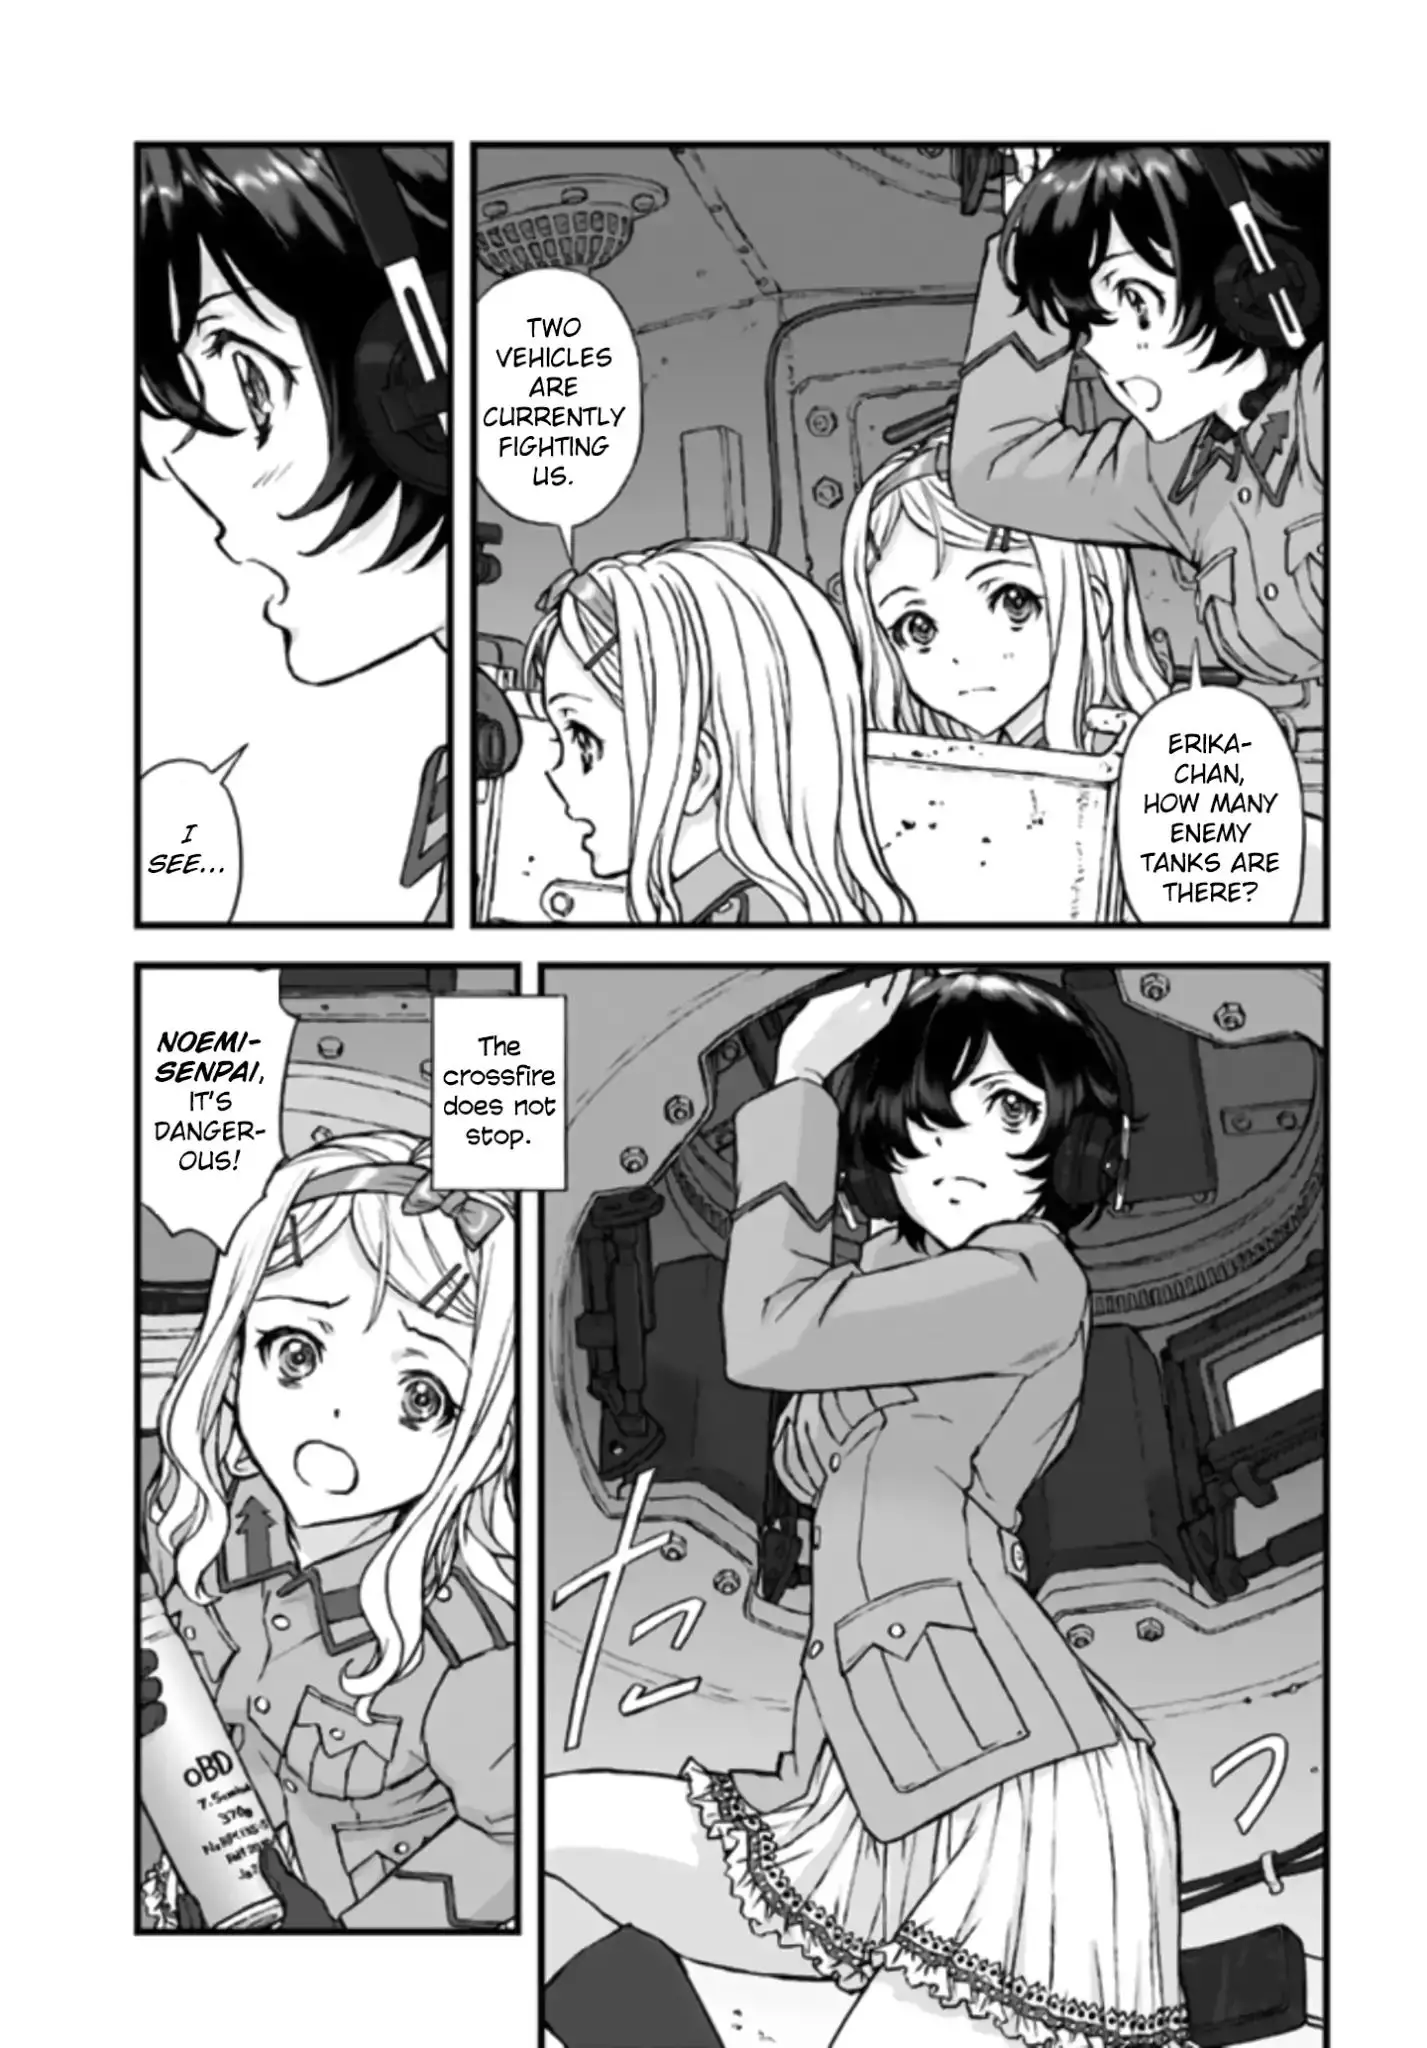 Girls Und Panzer - The Fir Tree And The Iron-Winged Witch - 3 page 12